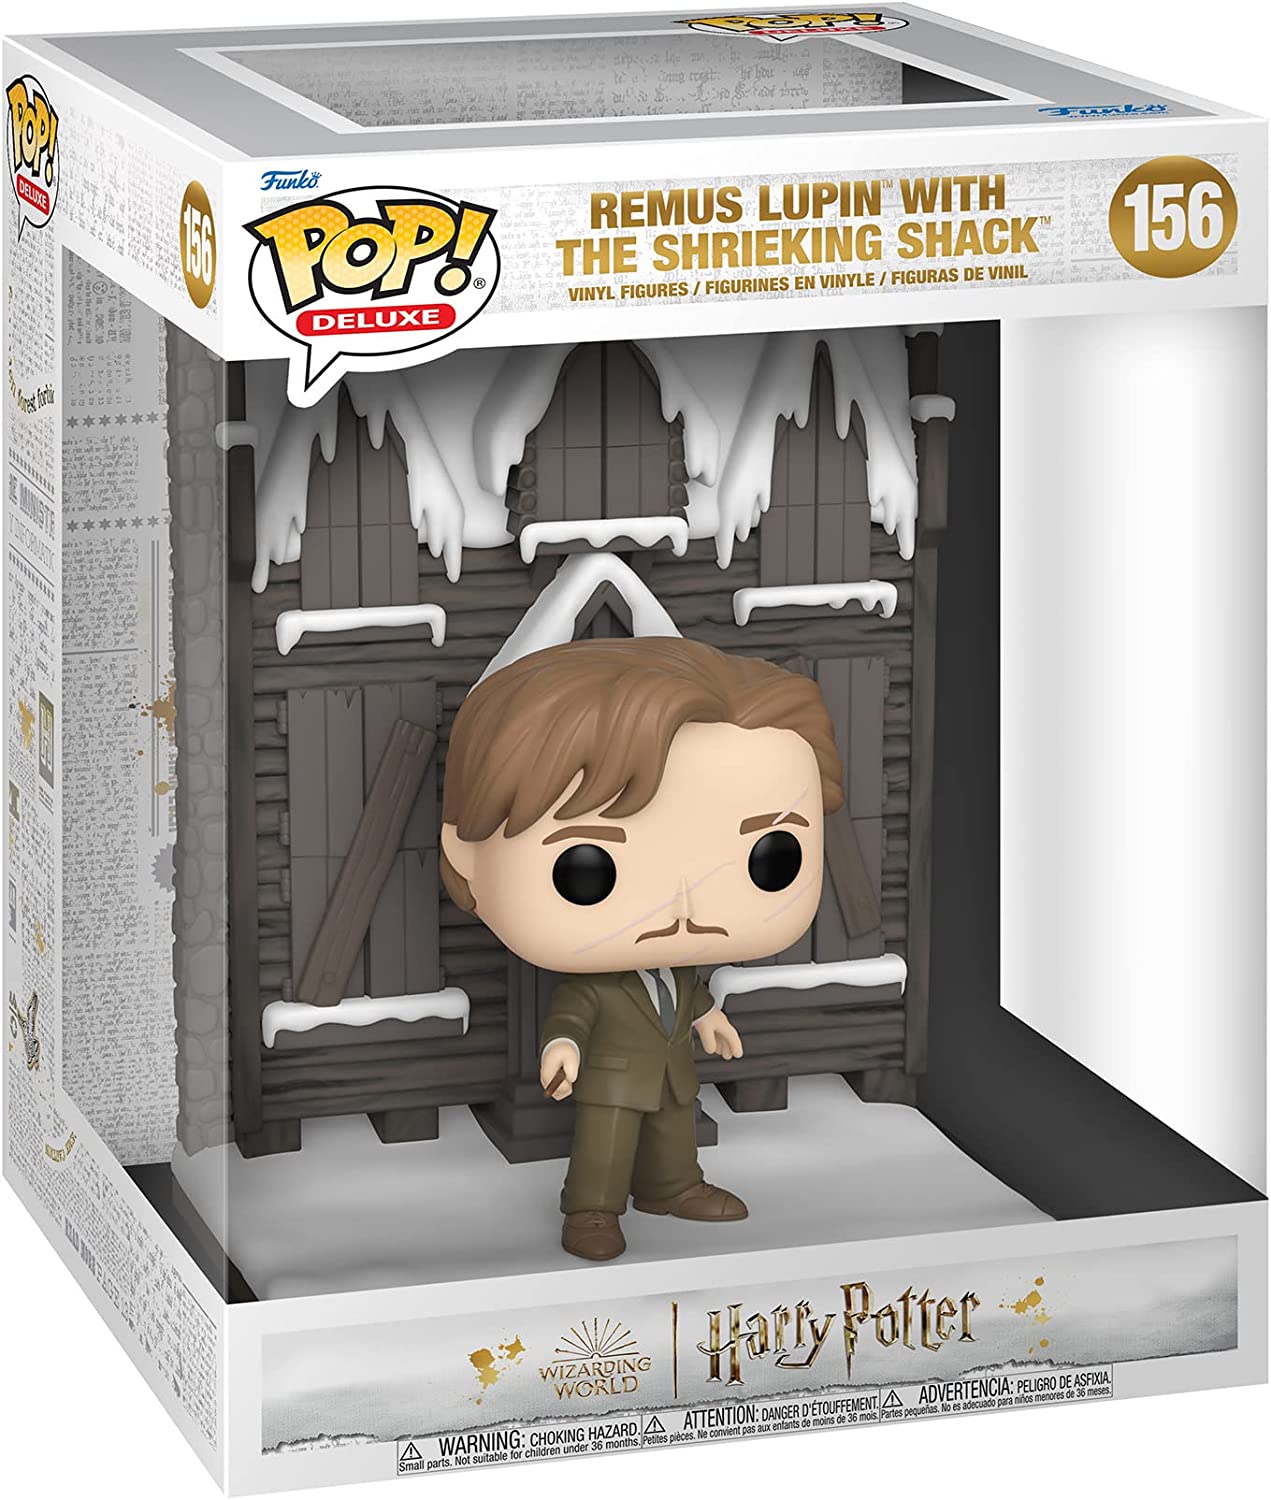 Funko POP! Deluxe: Harry Potter - Remus Lupin with the Shrieking Shack